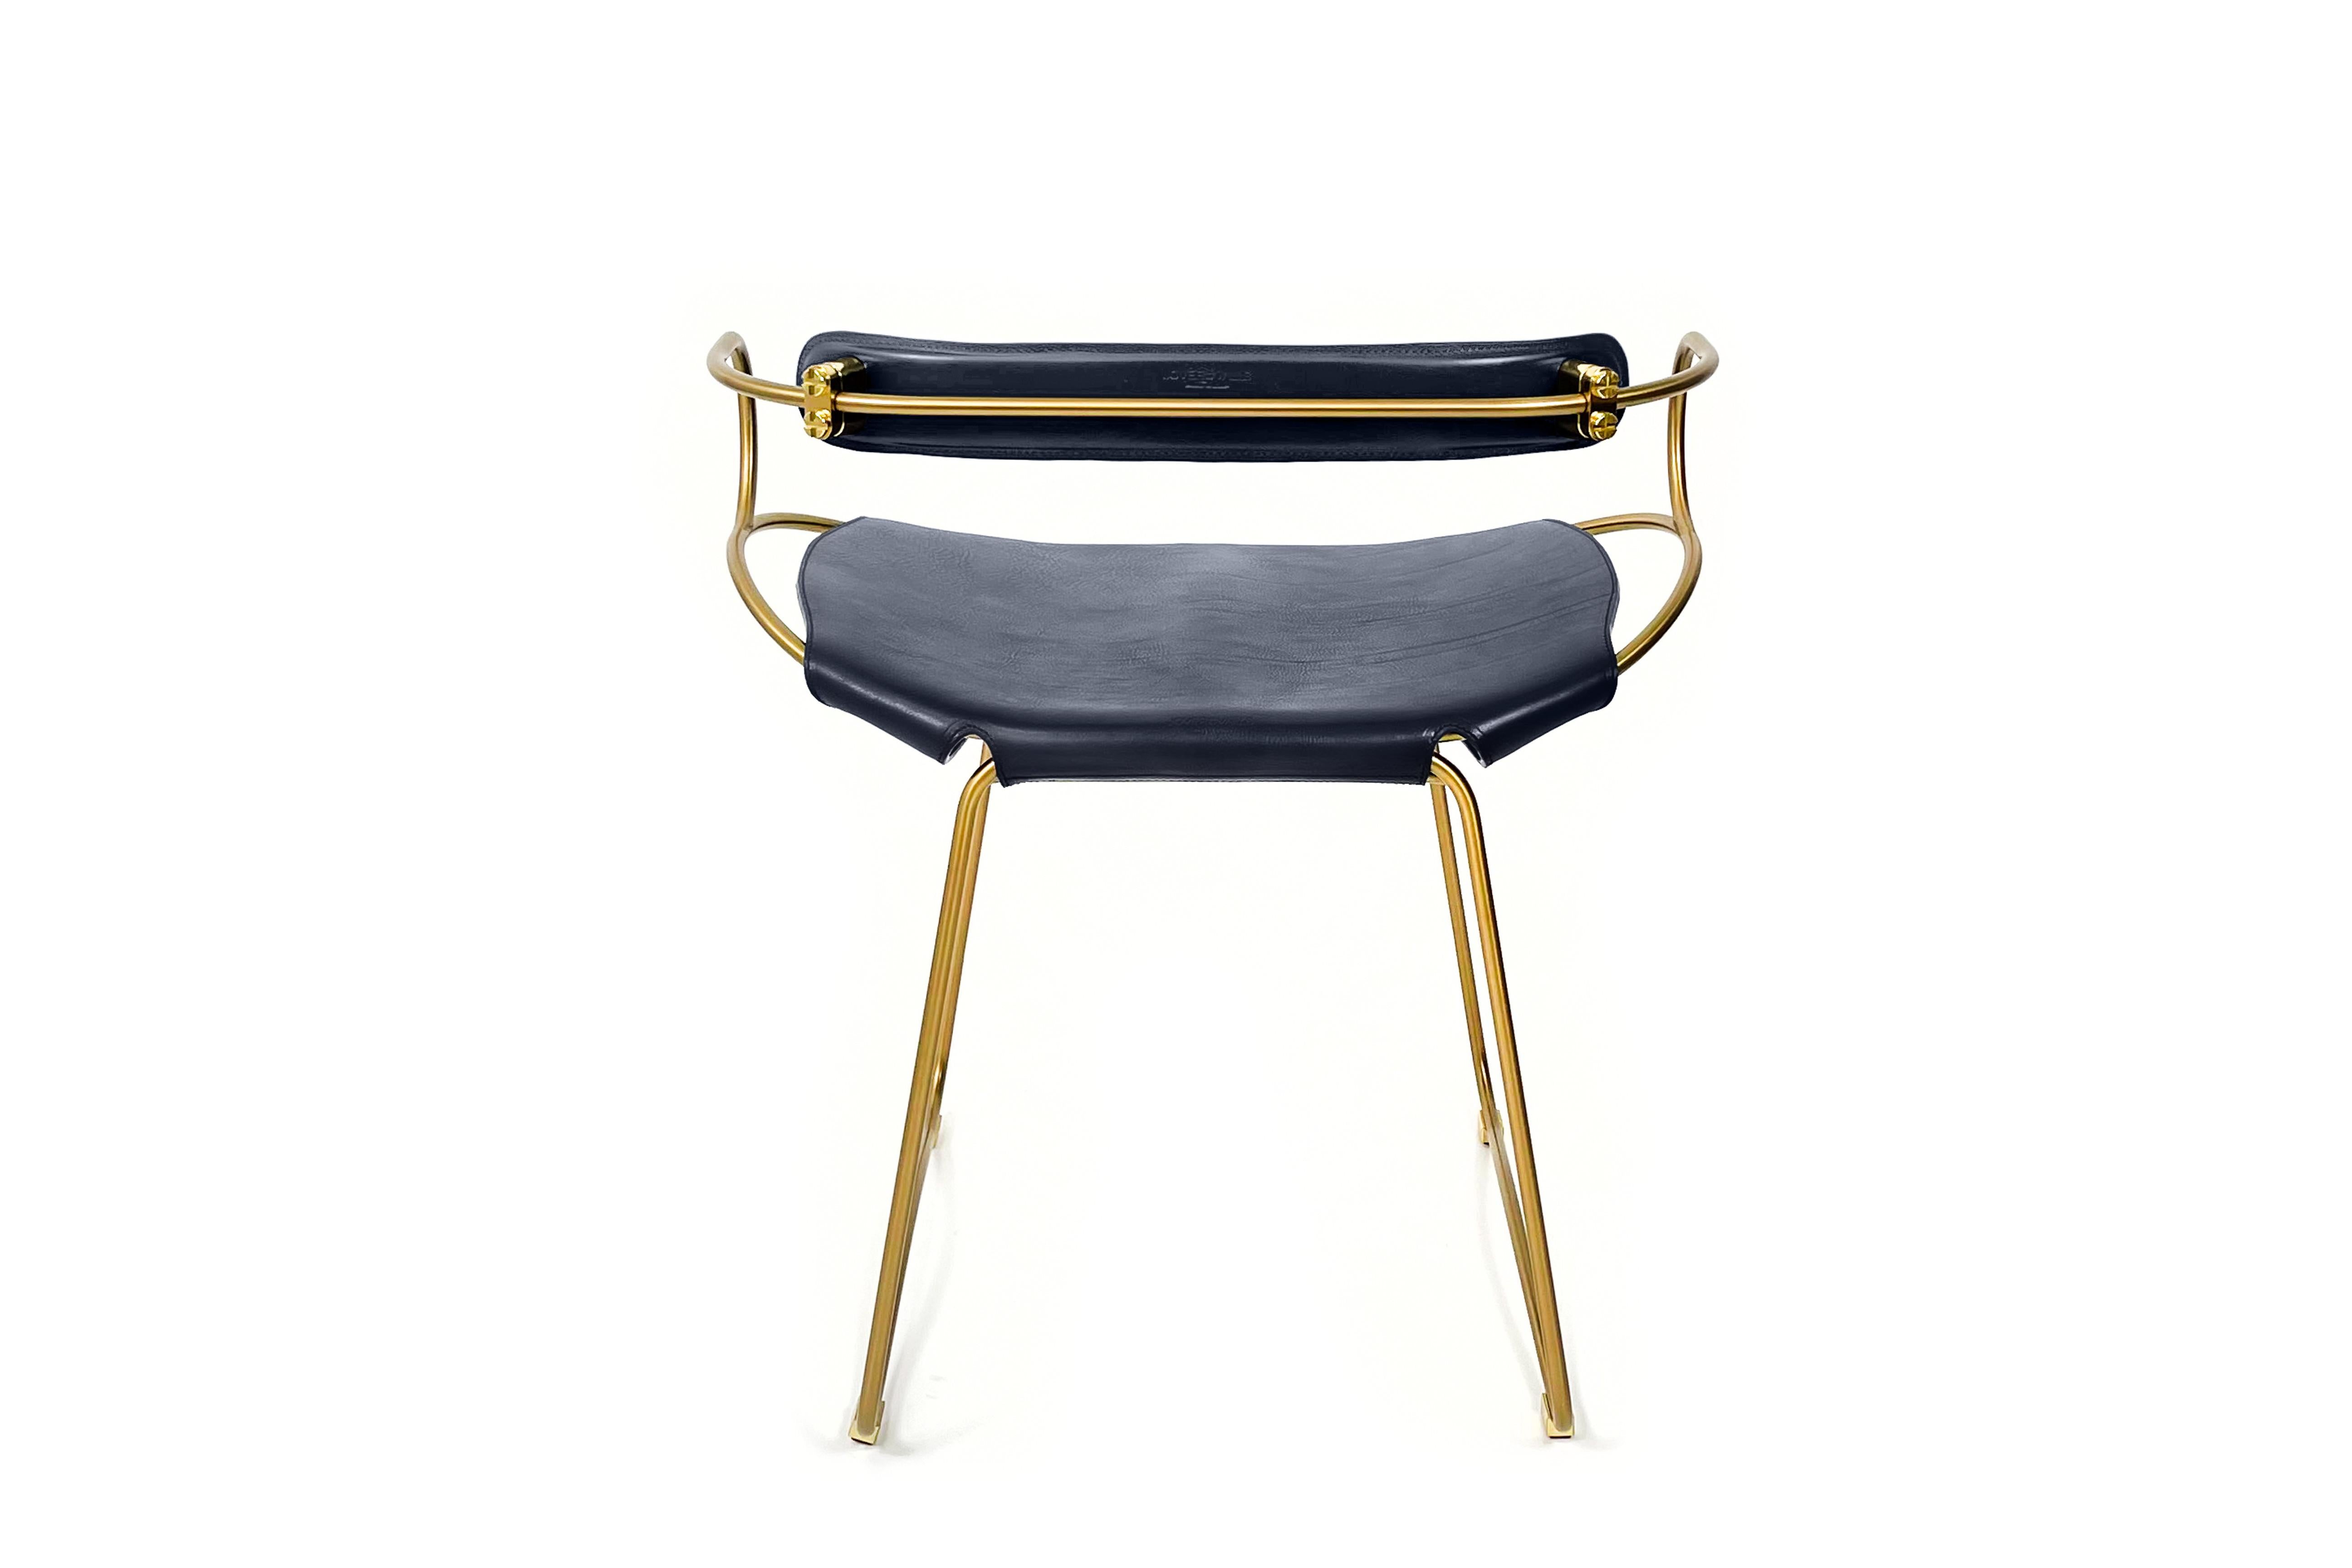 Polished Contemporary Chair / Table Stool W Backrest Aged Brass Metal & Navy Blue Leather For Sale